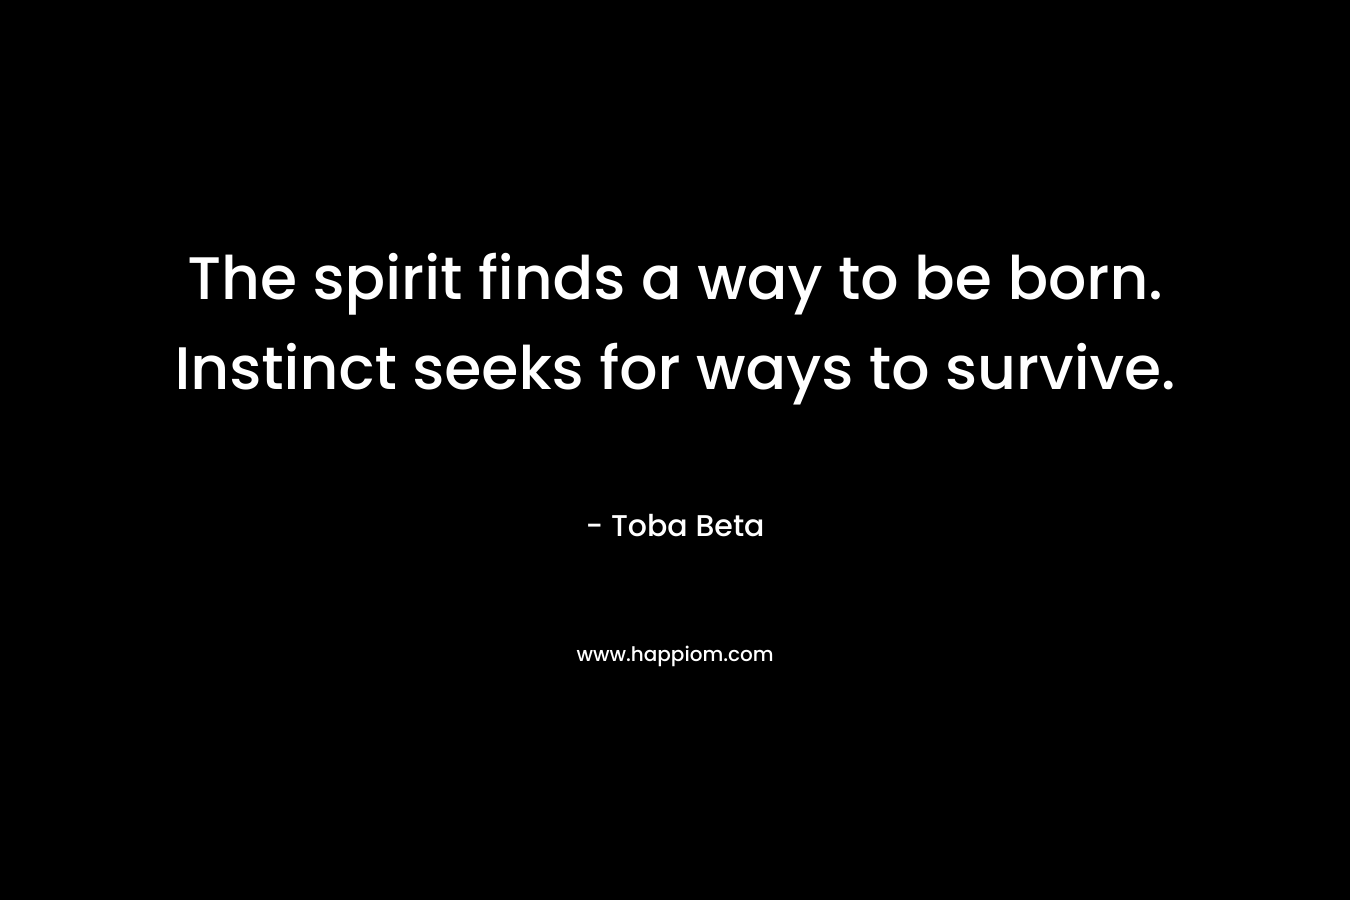 The spirit finds a way to be born. Instinct seeks for ways to survive.